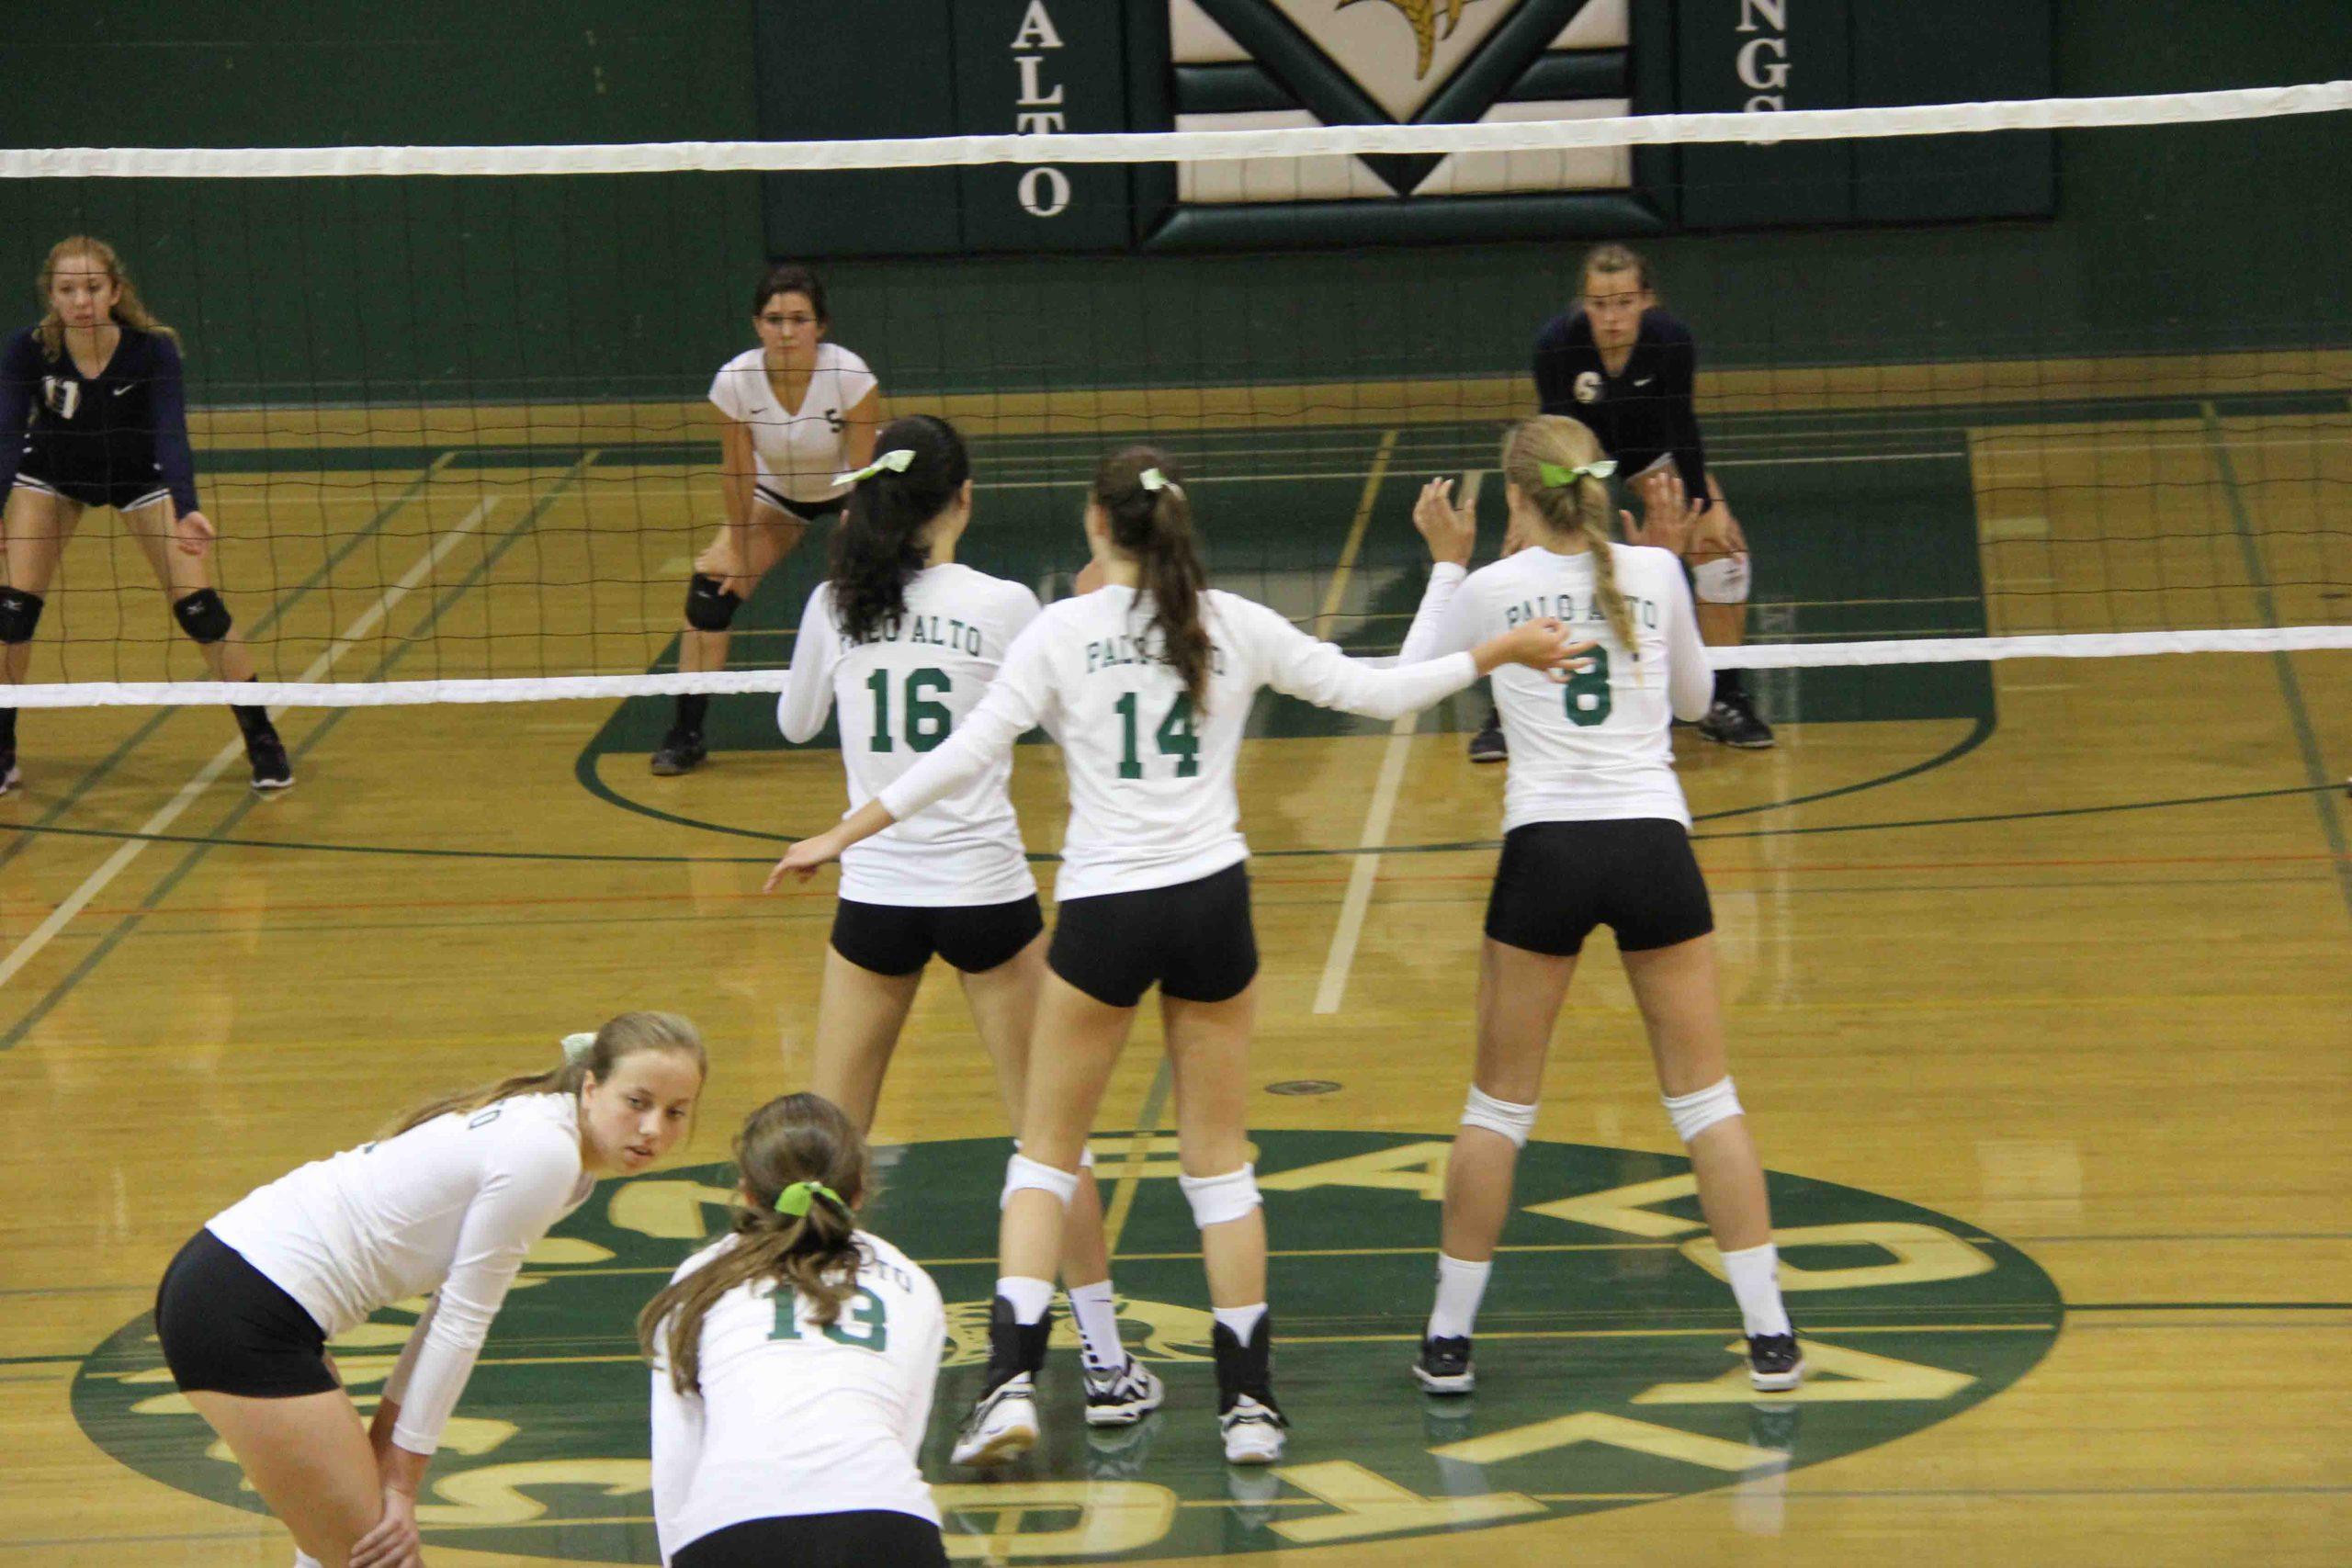 The volleyball team prepares to receive the serve in a regular season game at Paly.